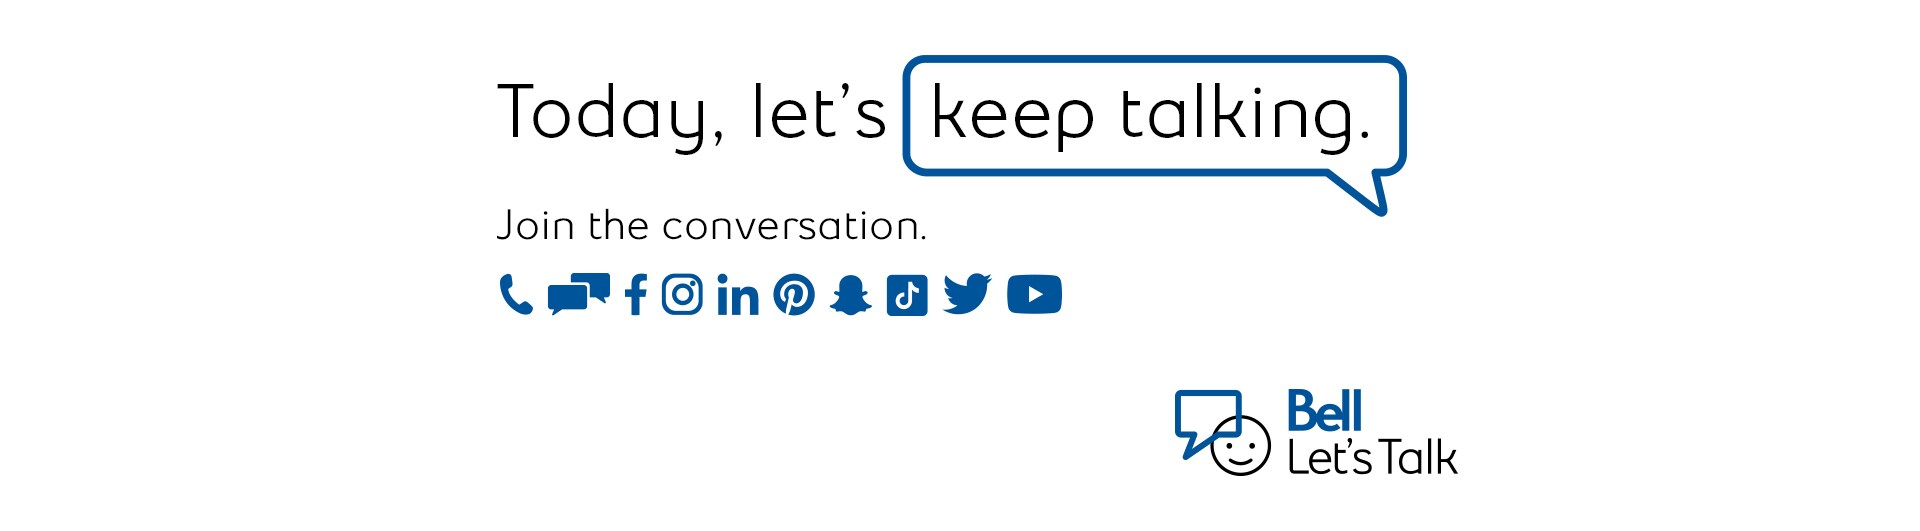 Today, let's keep talking. Join the conversation.